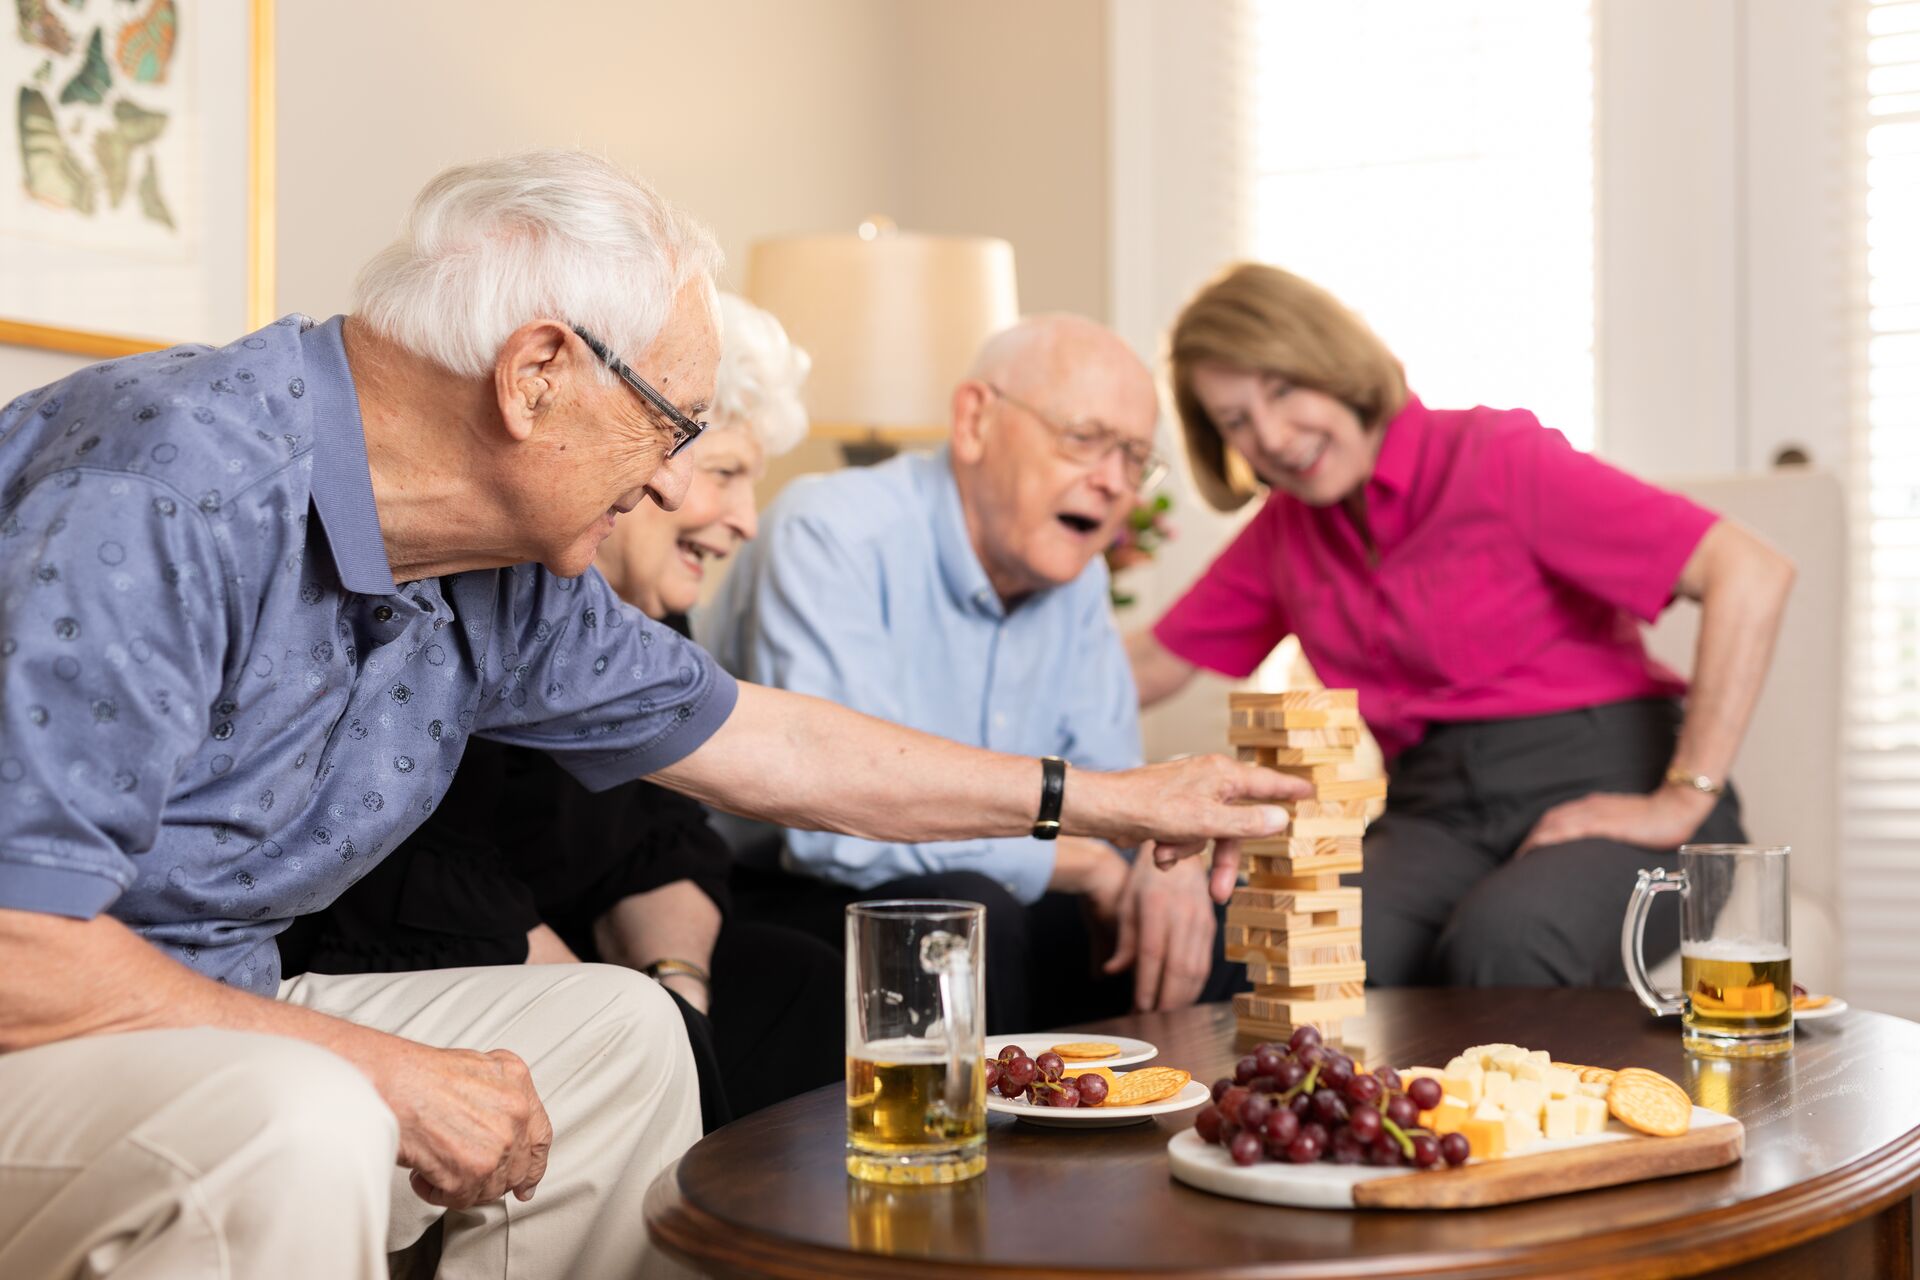 Senior residents playing jenga and enjoying beers in a senior living apartment.